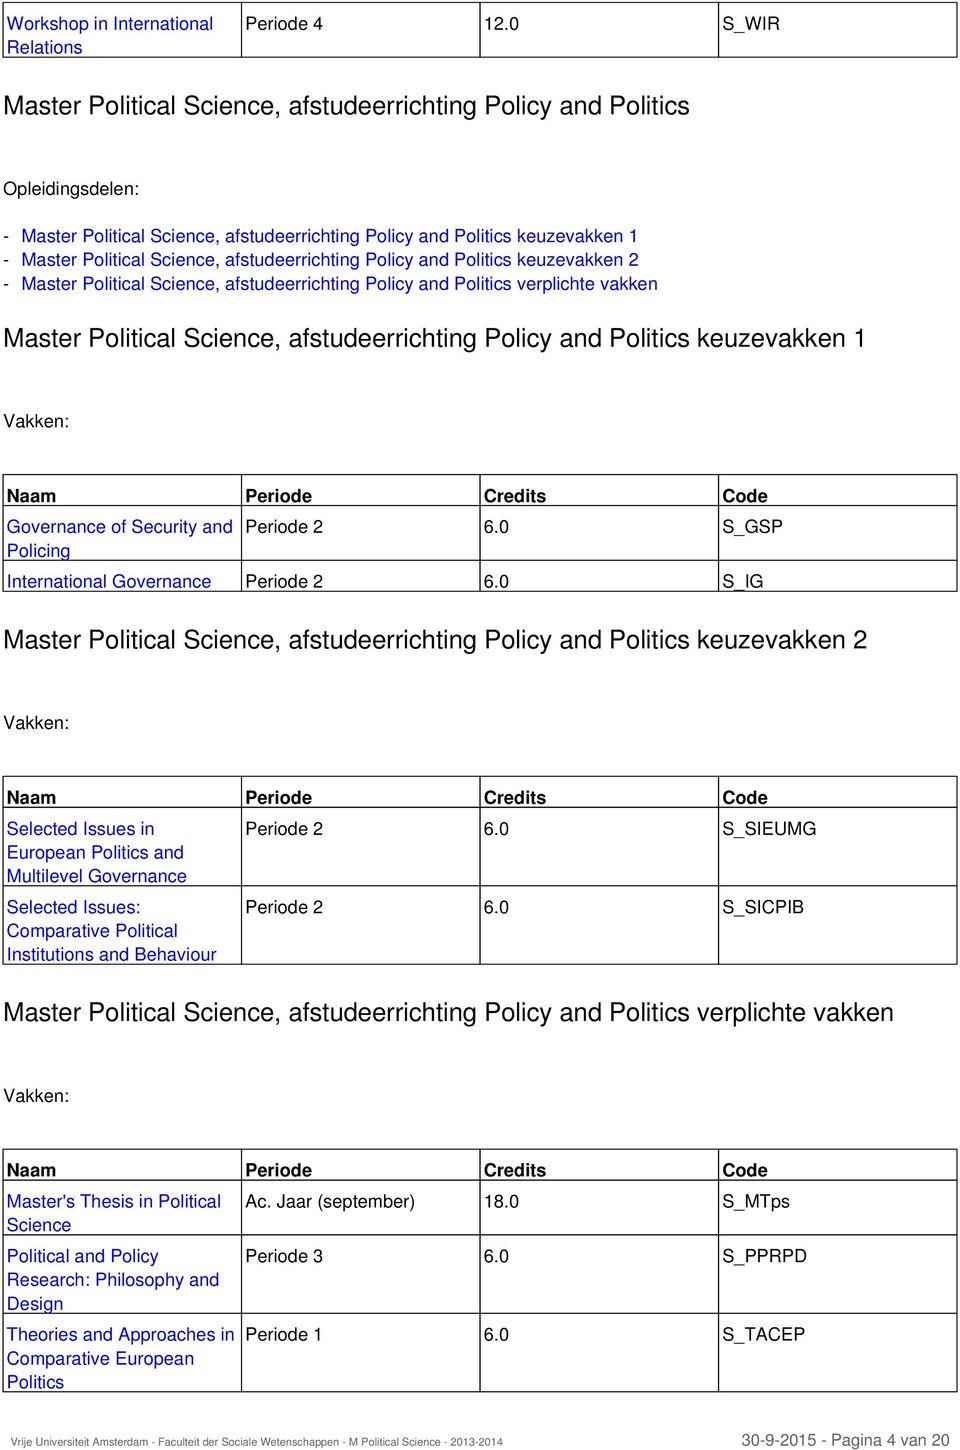 afstudeerrichting Policy and Politics keuzevakken 2 Master Political Science, afstudeerrichting Policy and Politics verplichte vakken Master Political Science, afstudeerrichting Policy and Politics